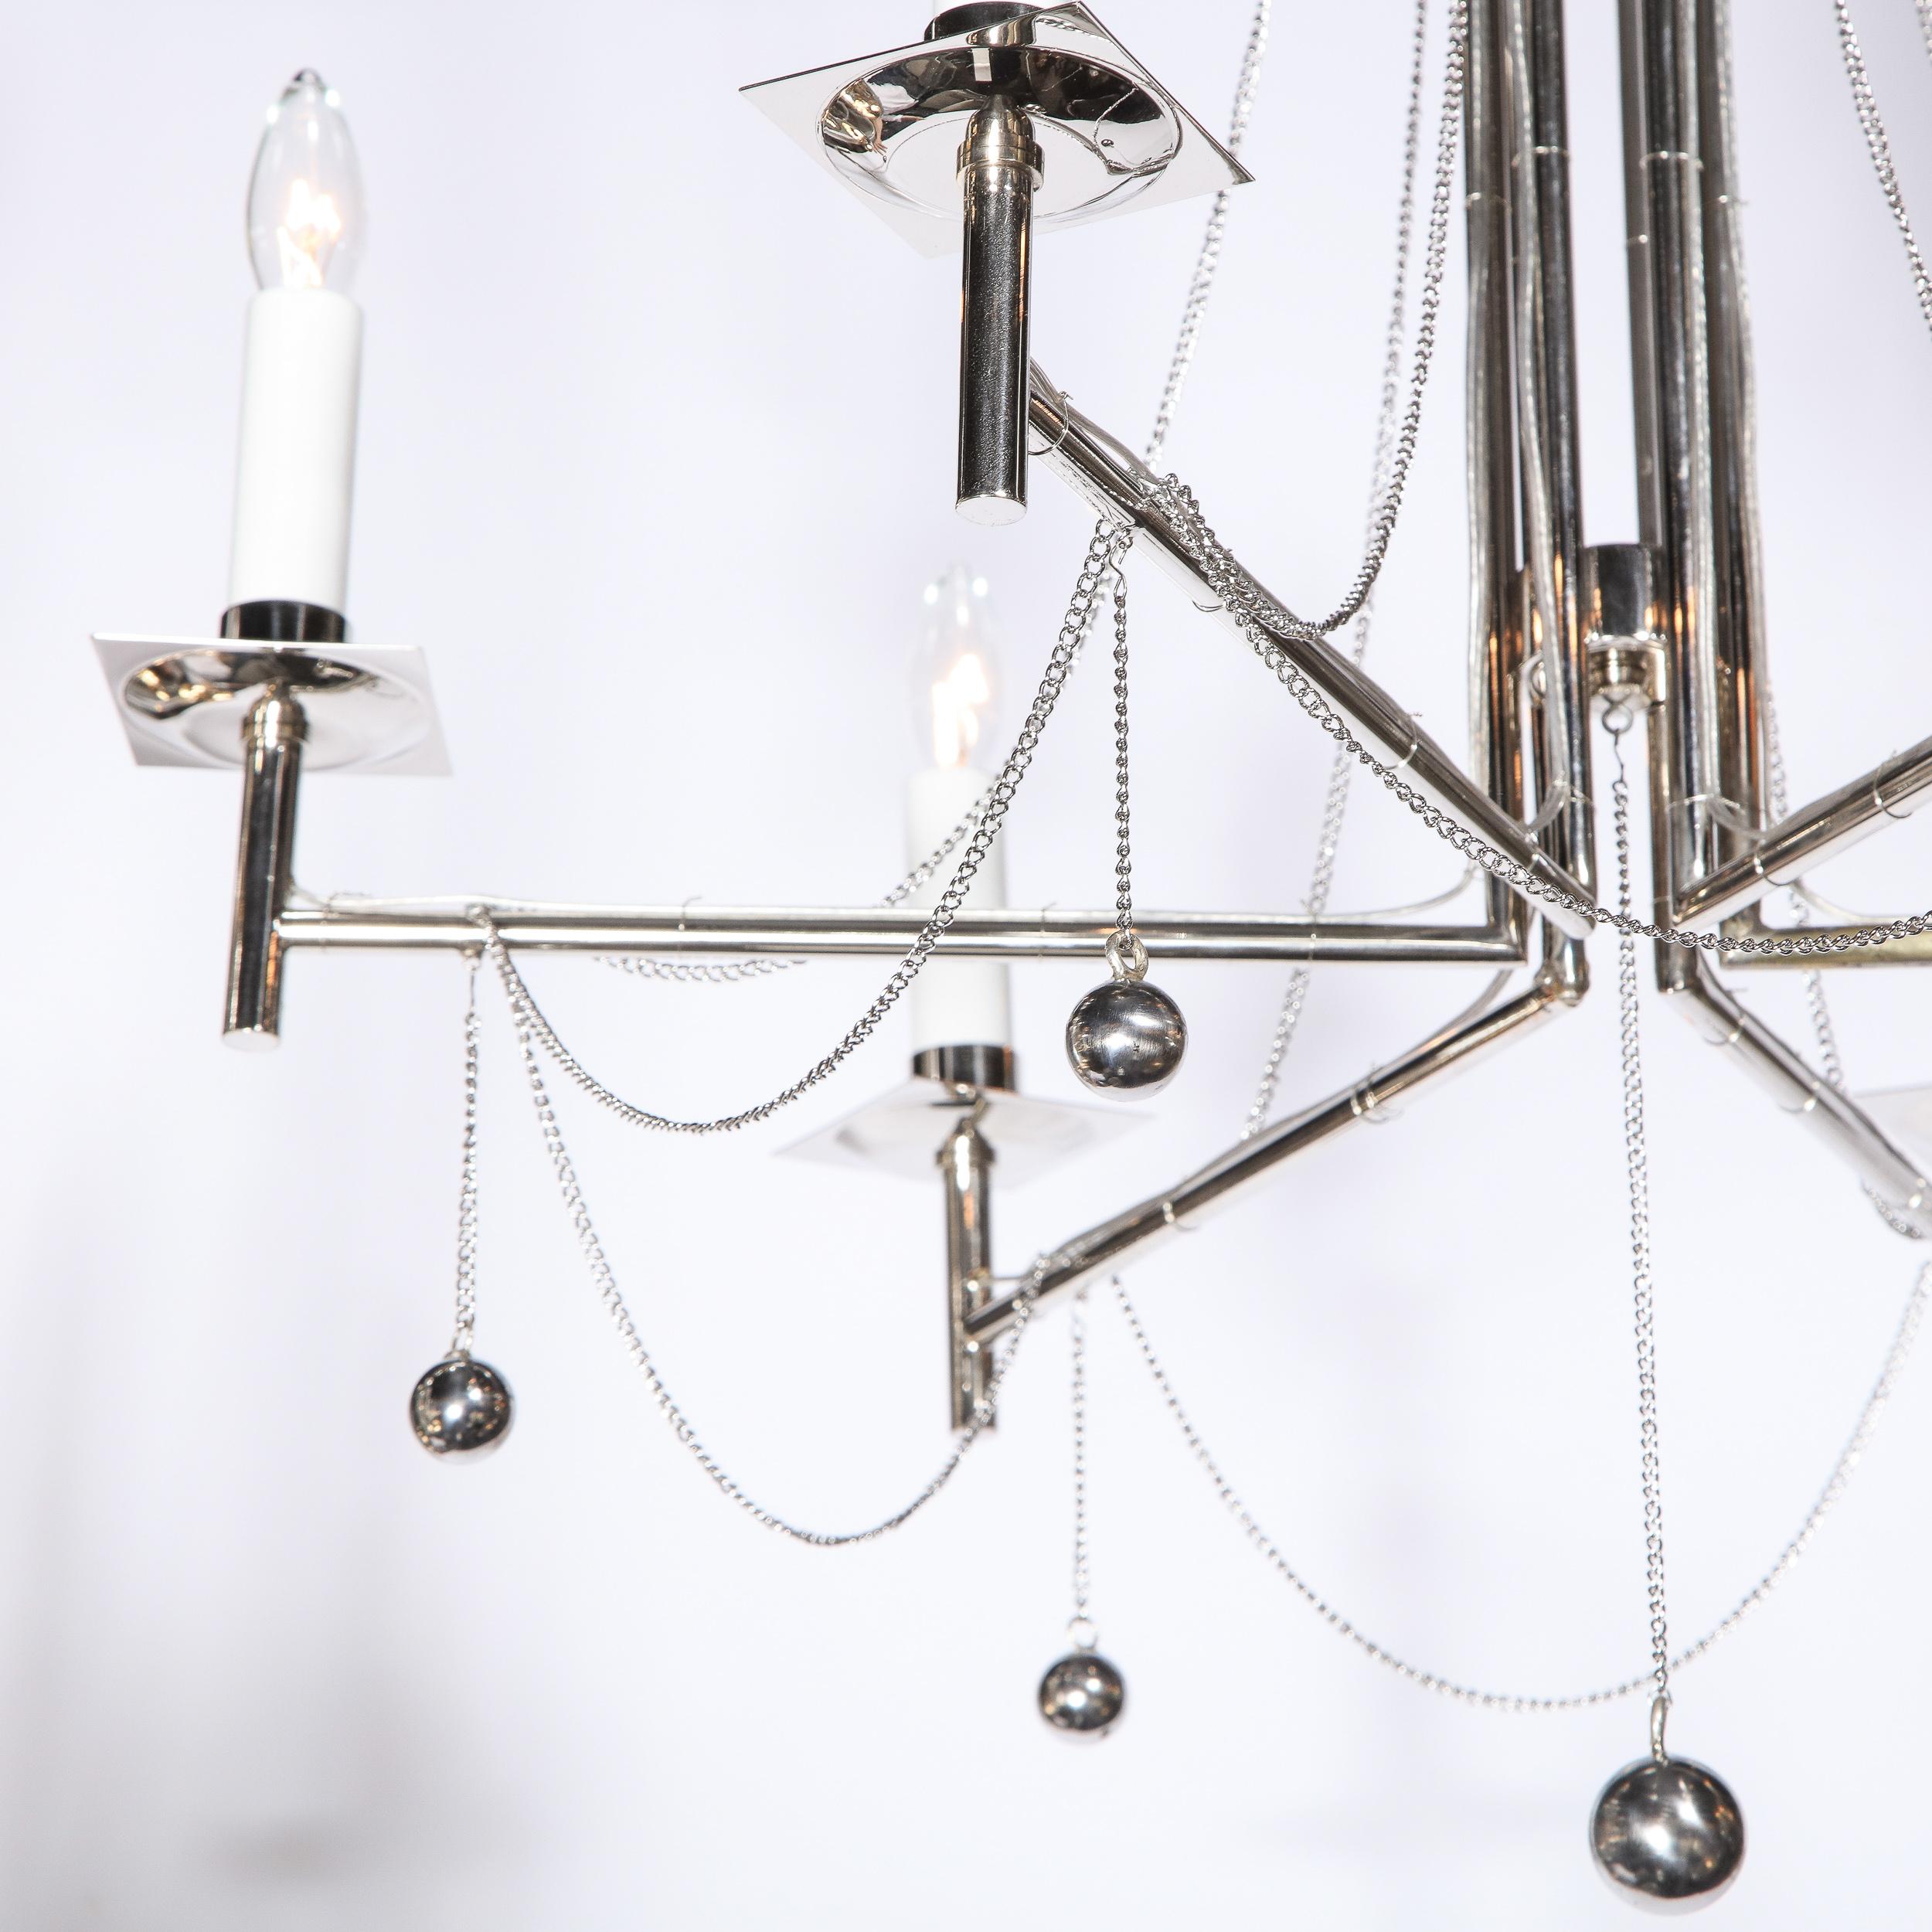 Modernist Polished Nickel Six Arm Chandelier with Chain and Spherical Details In Excellent Condition For Sale In New York, NY